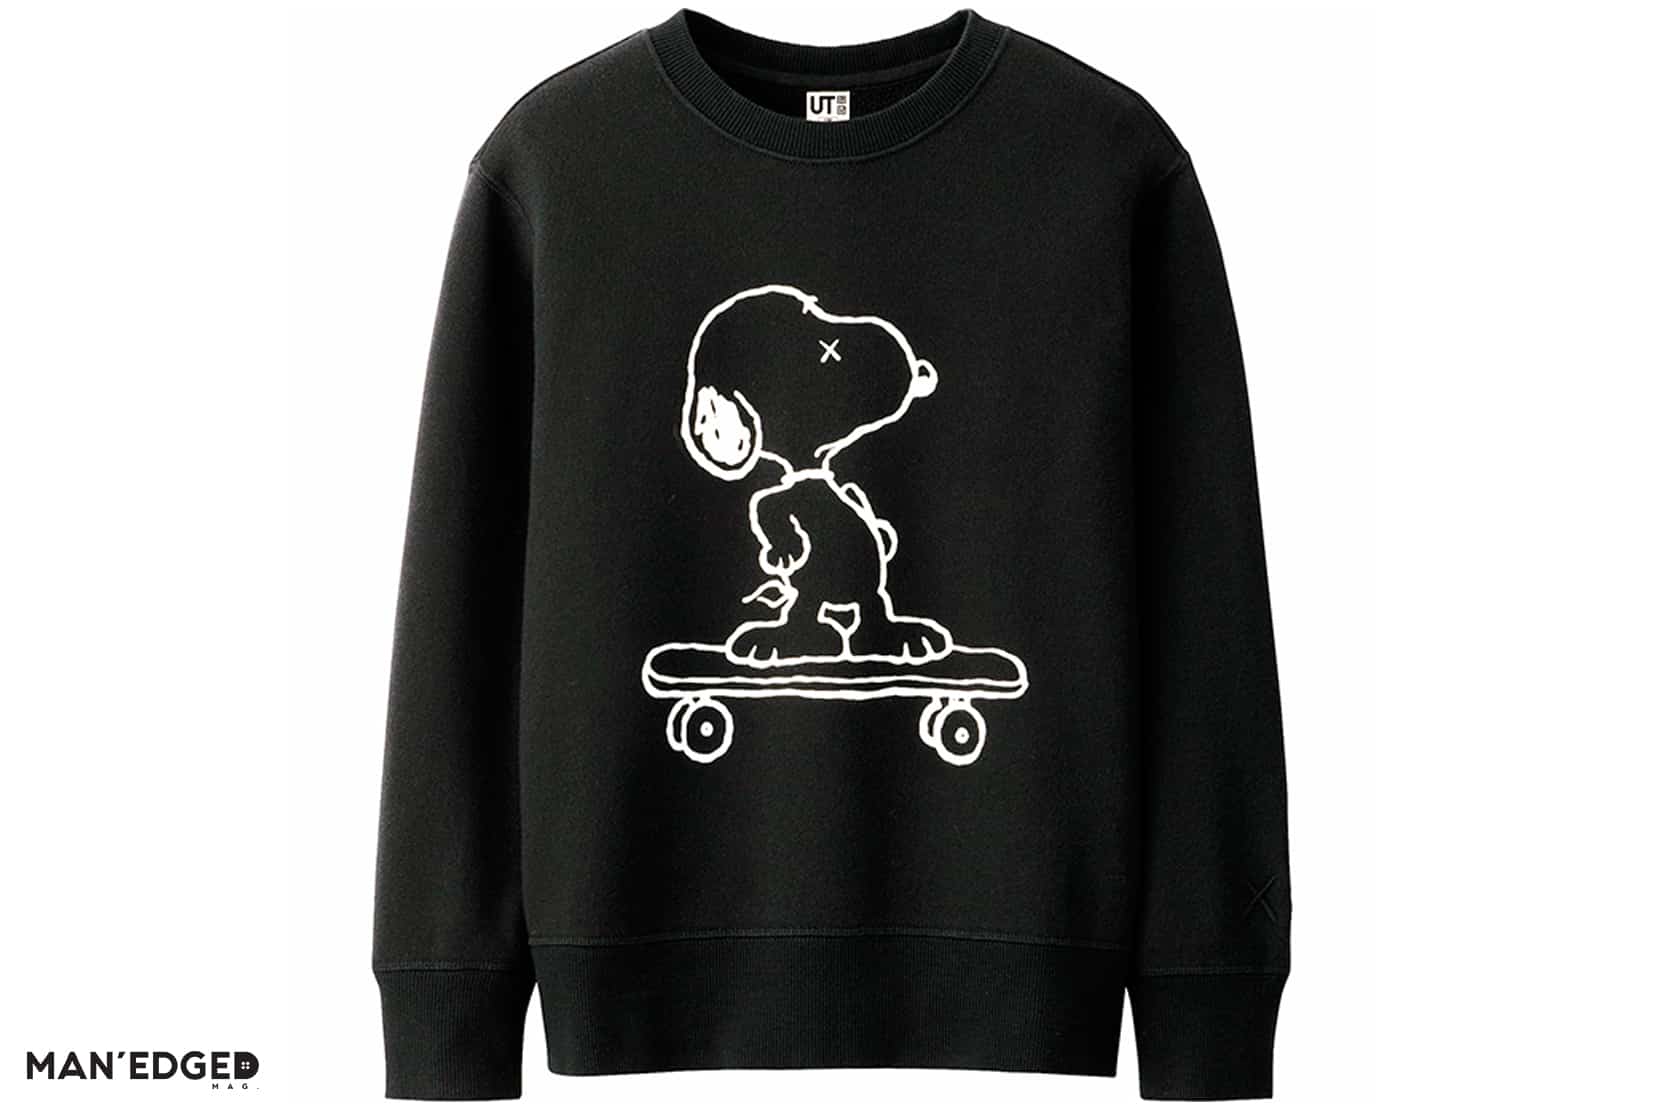 Gift ideas for the streetwear snob featuring Uniqlo x Kaws Snoopy Men's Sweater